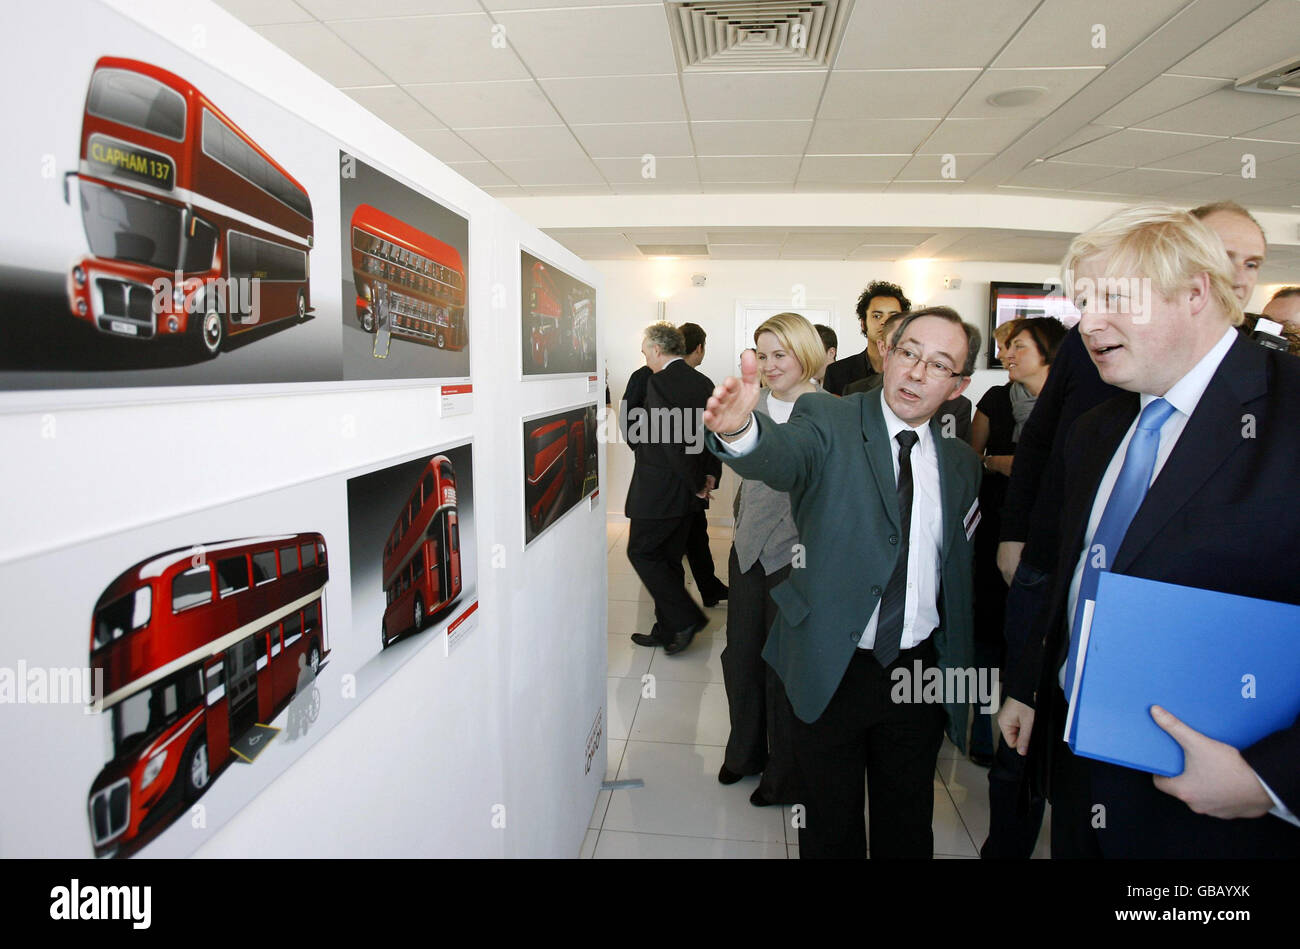 London Mayor Boris Johnson is shown the two winning designs in the New Bus for London competition at a reception inside Millbank Tower, central London, with the Capoco Design Ltd image pictured top left, and the collaborative design from Aston Martin and Foster and Partners pictured top right. Stock Photo